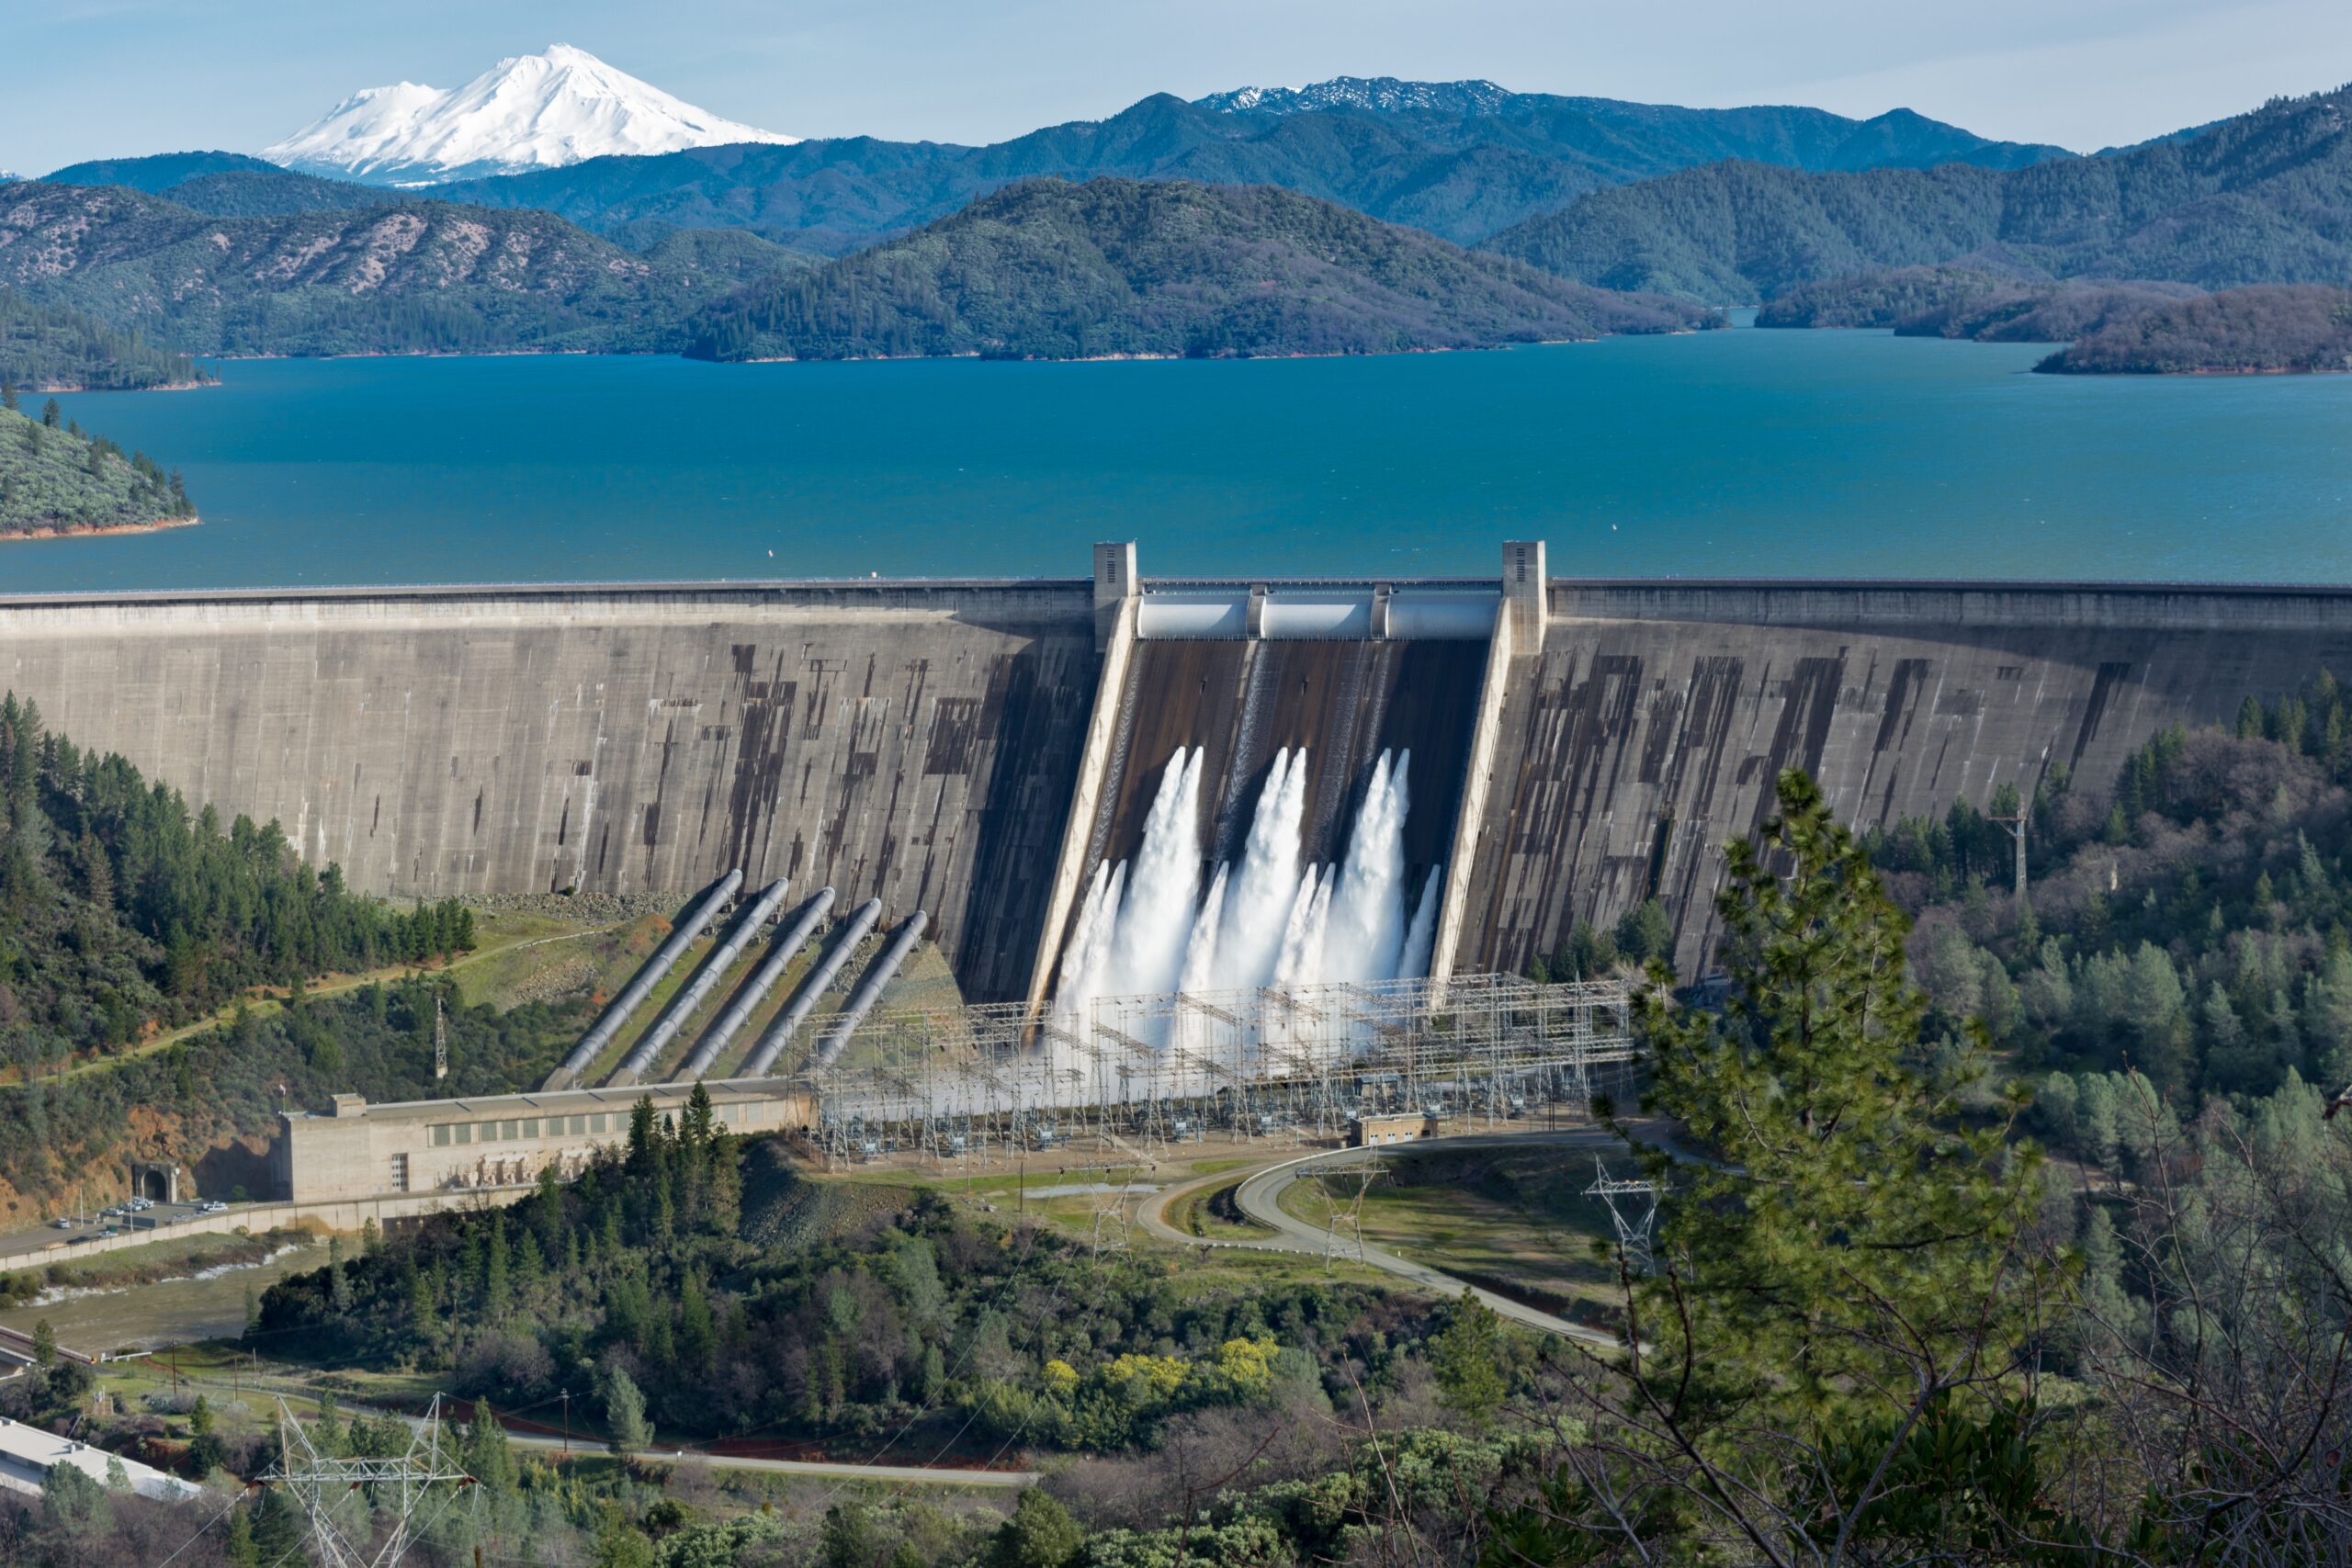 Picture of Shasta Dam surrounded by roads and trees with a lake and mountains on the background